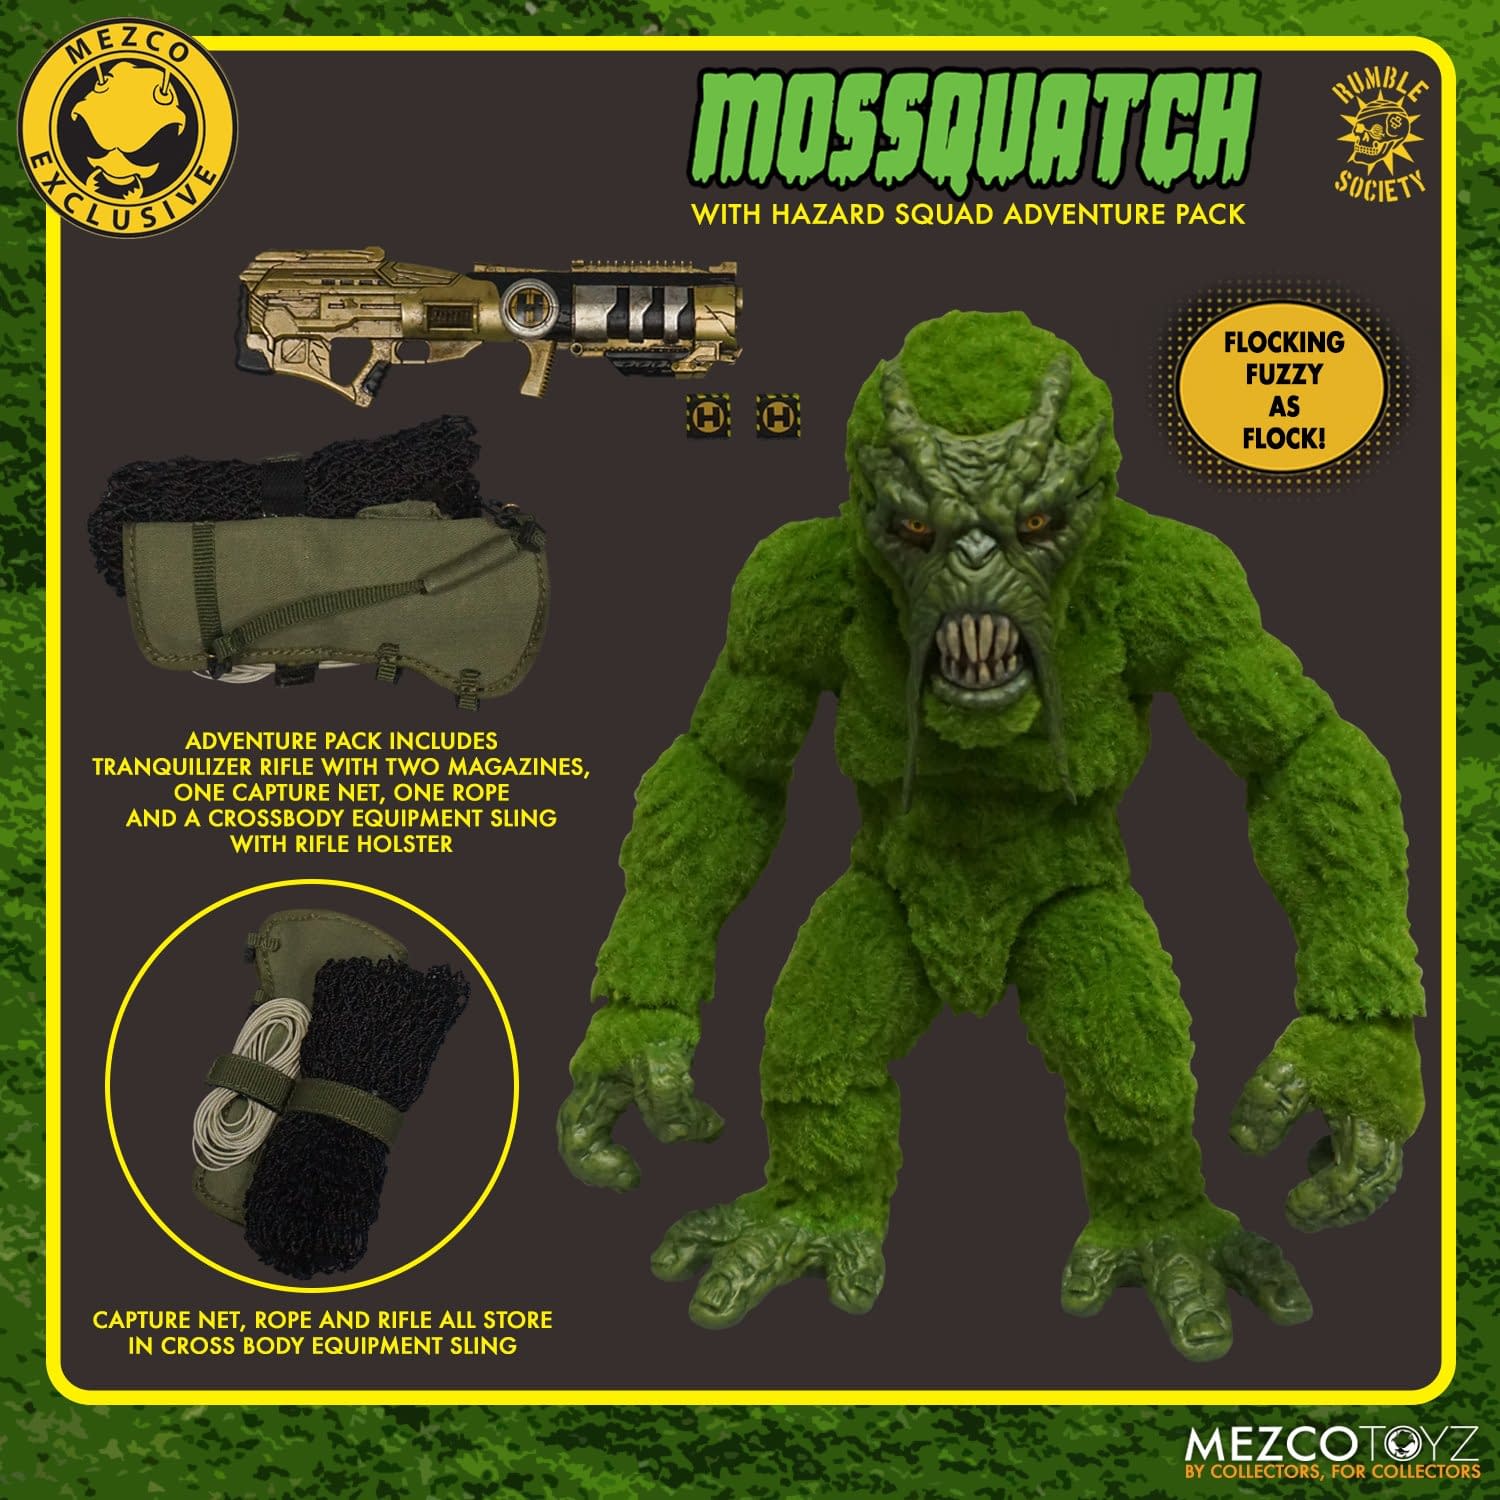 Mezco Unveils First Rumble Society Monster Figure with the Mossquatch